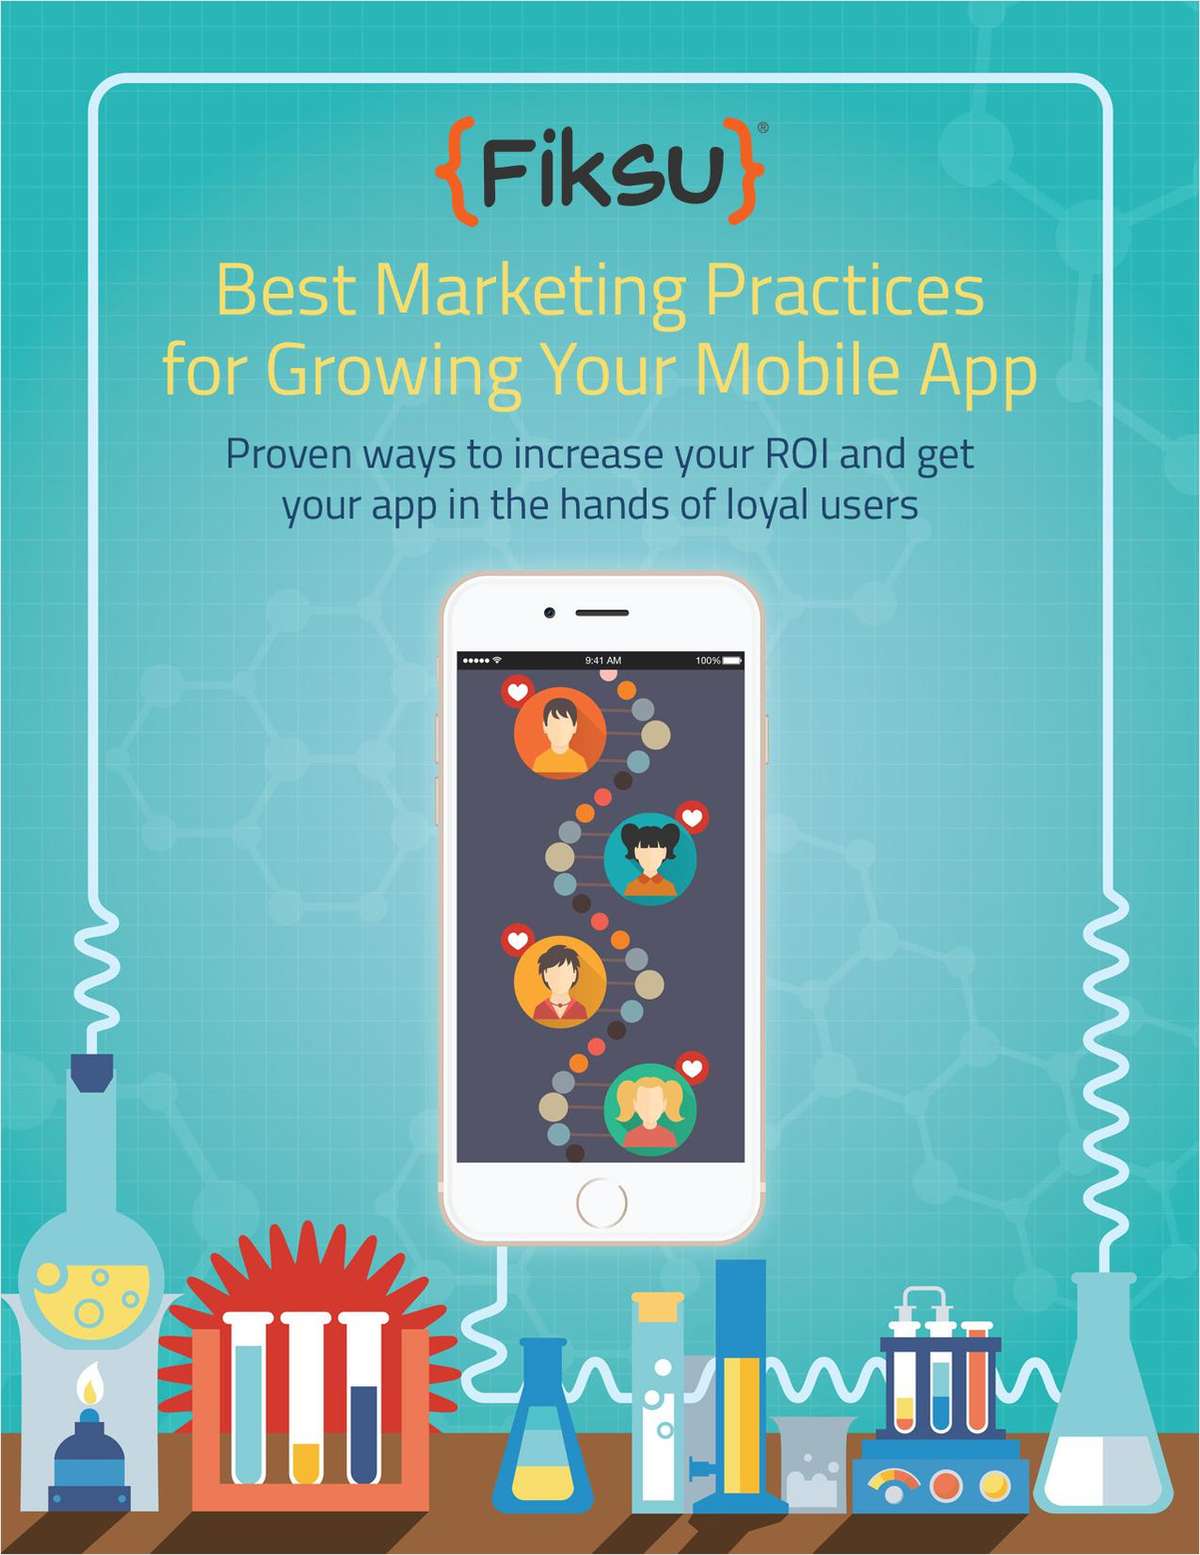 Best Marketing Practices for Growing Your Mobile App